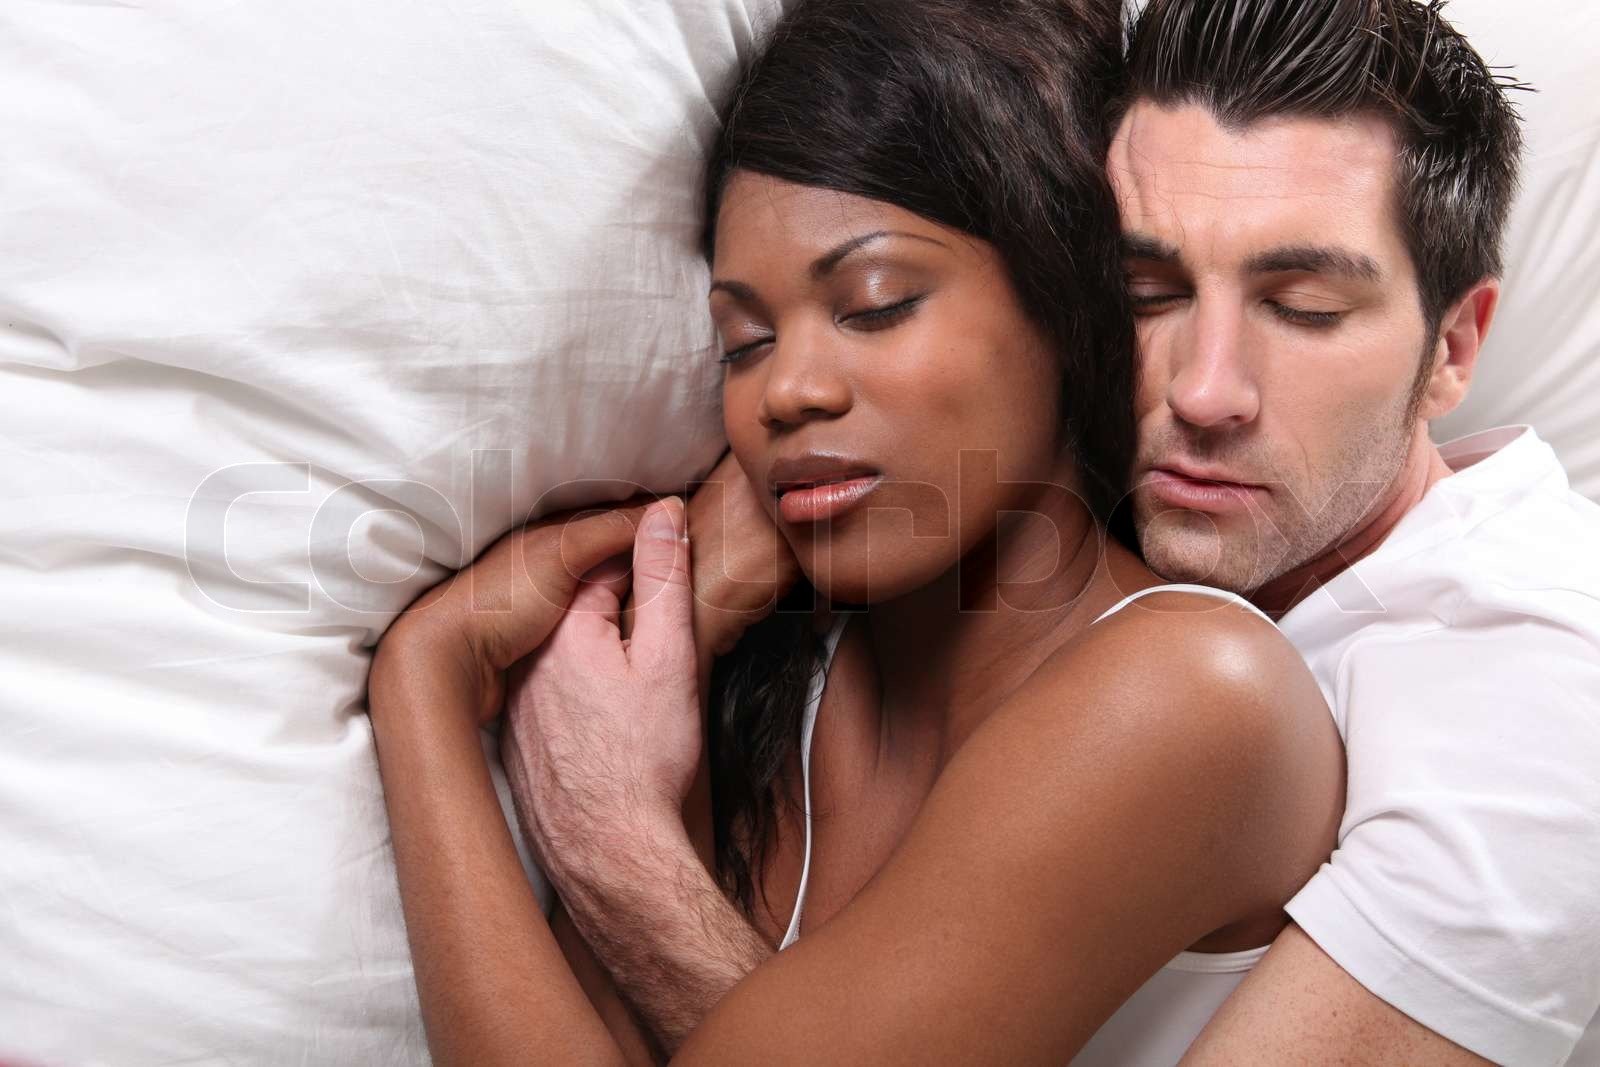 daria webster recommends Pictures Of Couples Cuddling In Bed